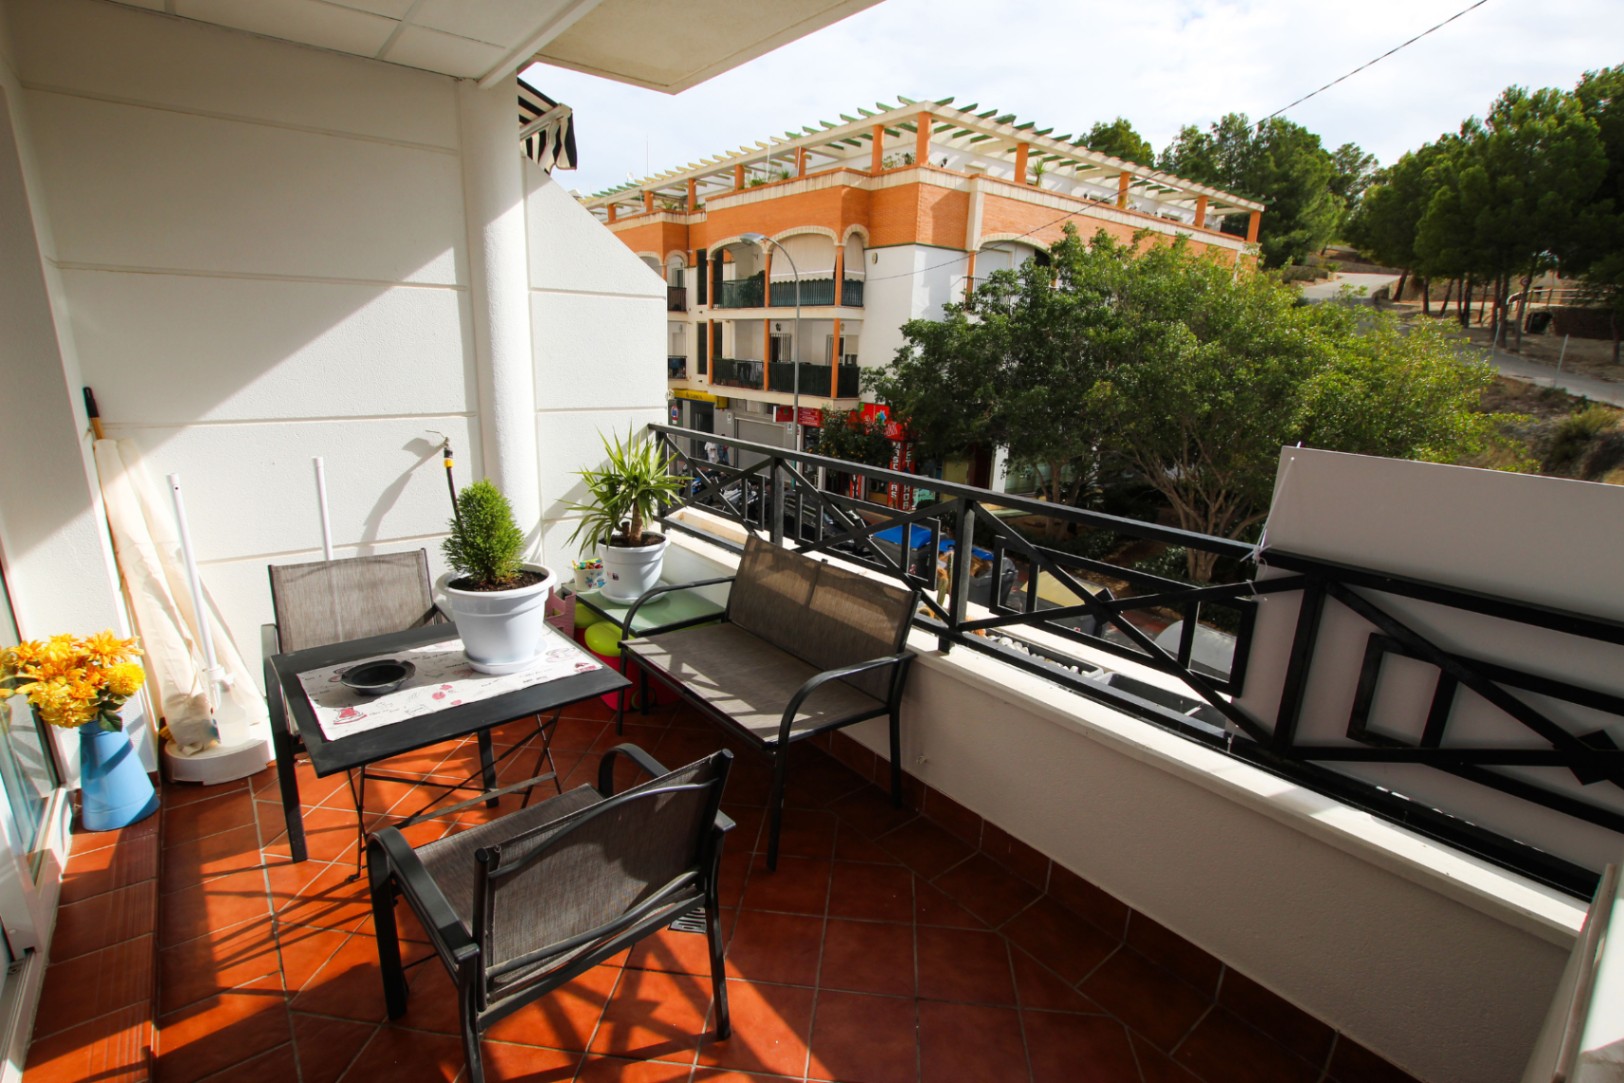 Calpe : 2 bedroom apartment with a view of the park